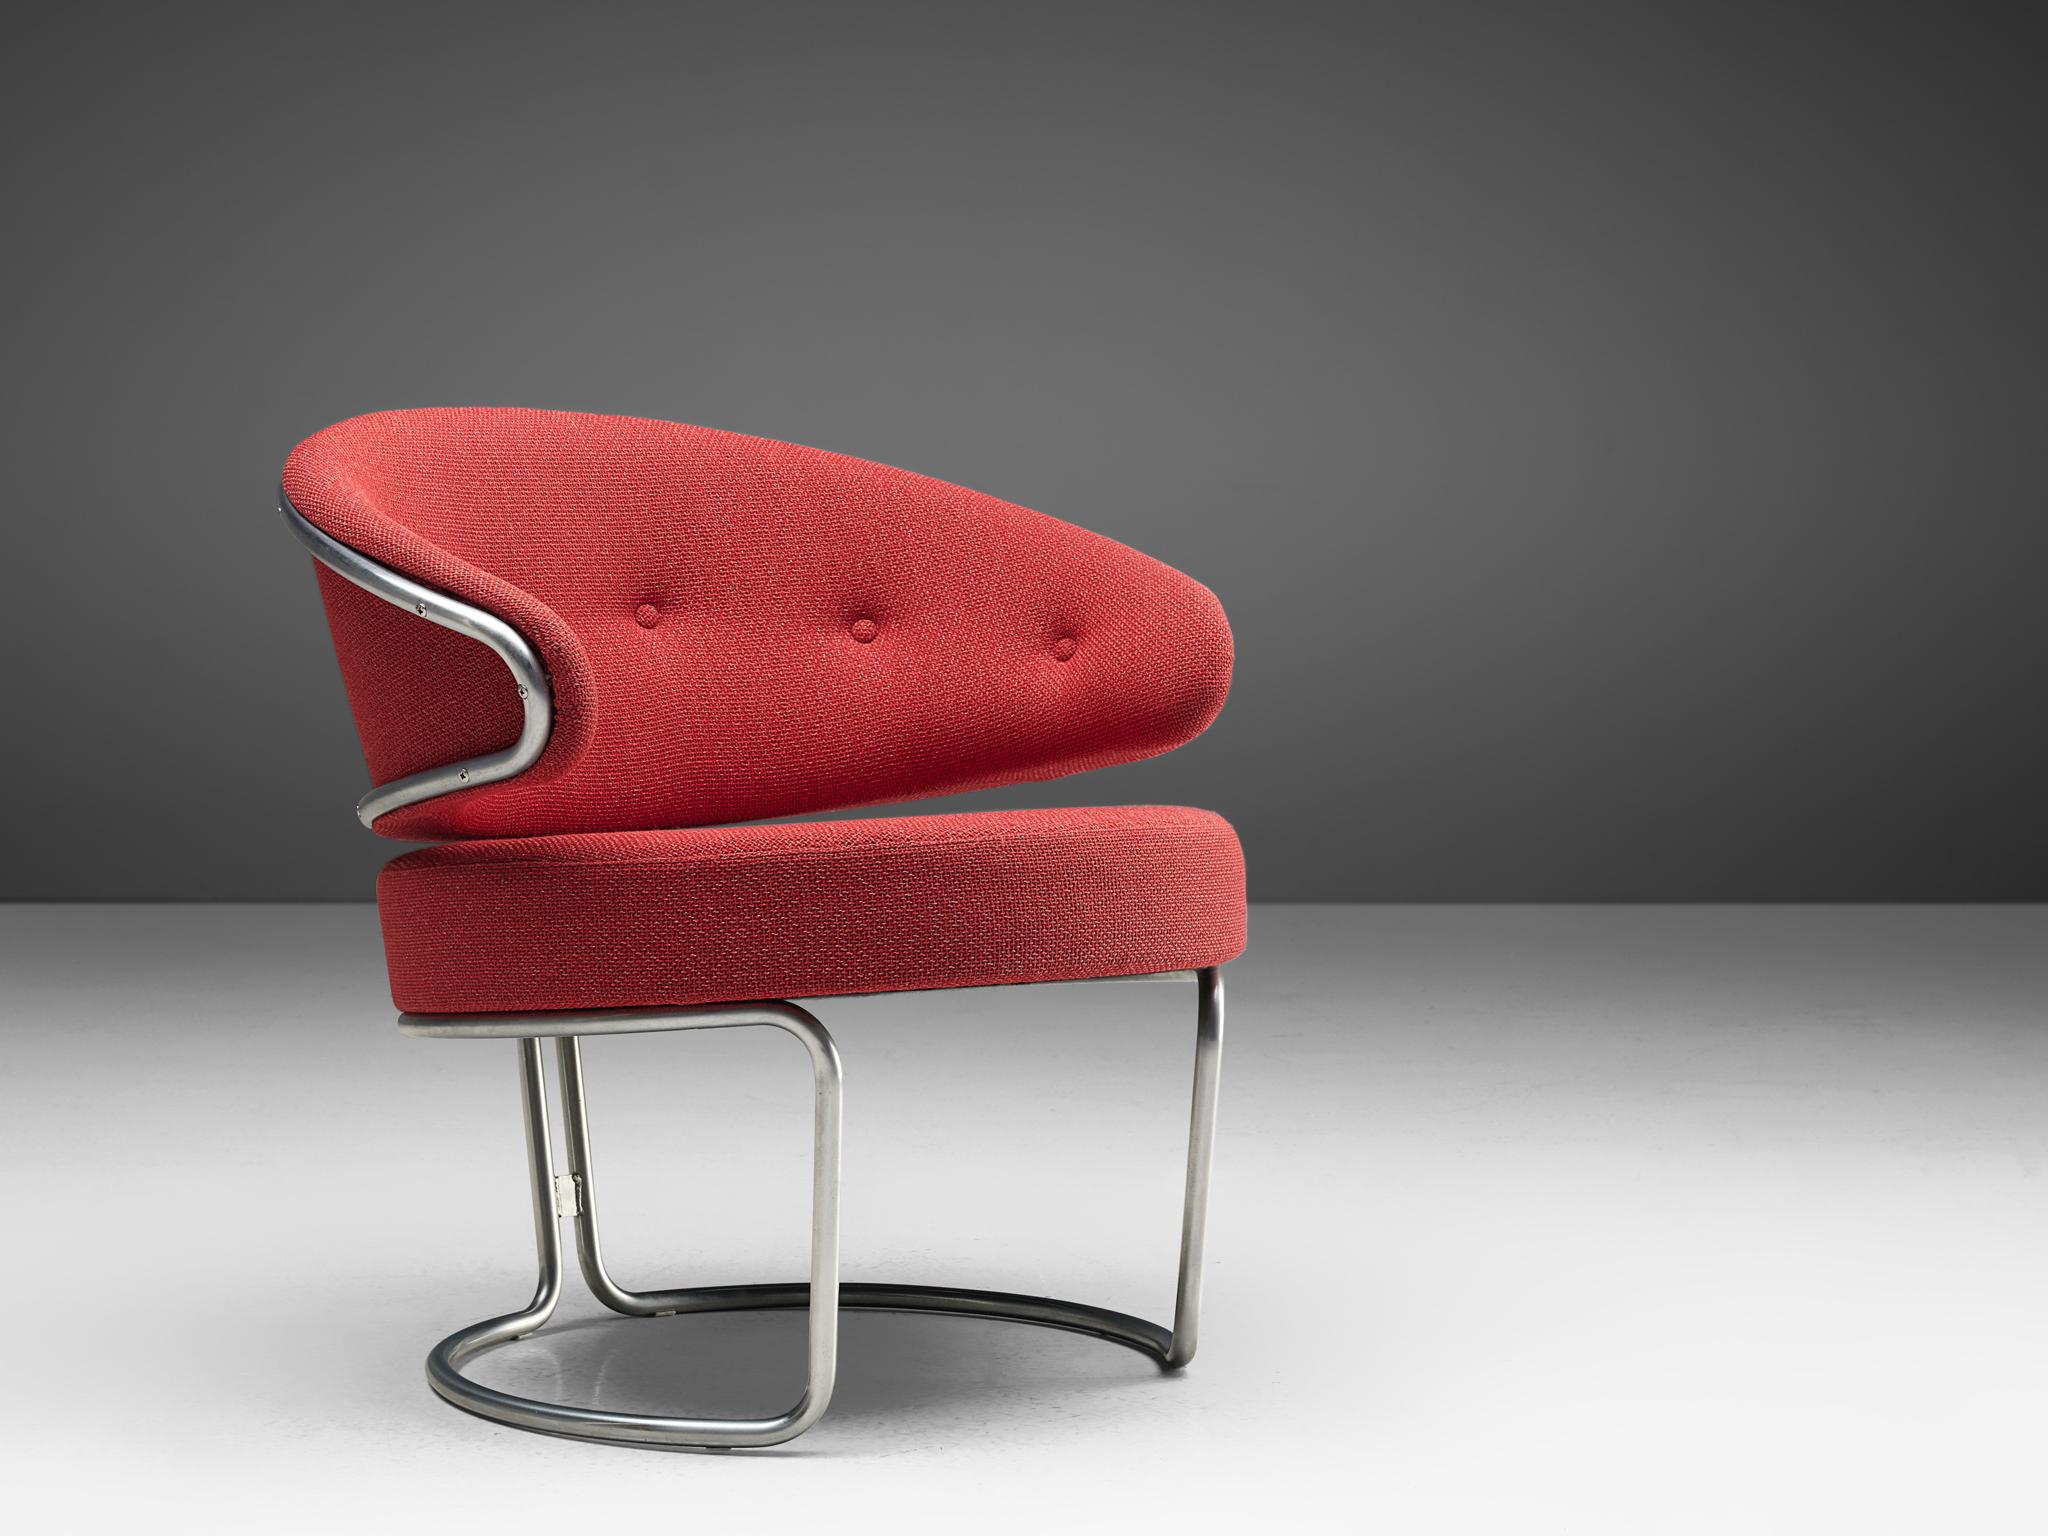 Grete Jalk for Fritz Hansen, lounge chair, chromed metal, fabric, Denmark, 1968.

A postwar lounge chair designed by Grete Jalk in 1968. The piece is executed with a tubular chromed steel frame and red cushions that mimic the shape of the frame. The